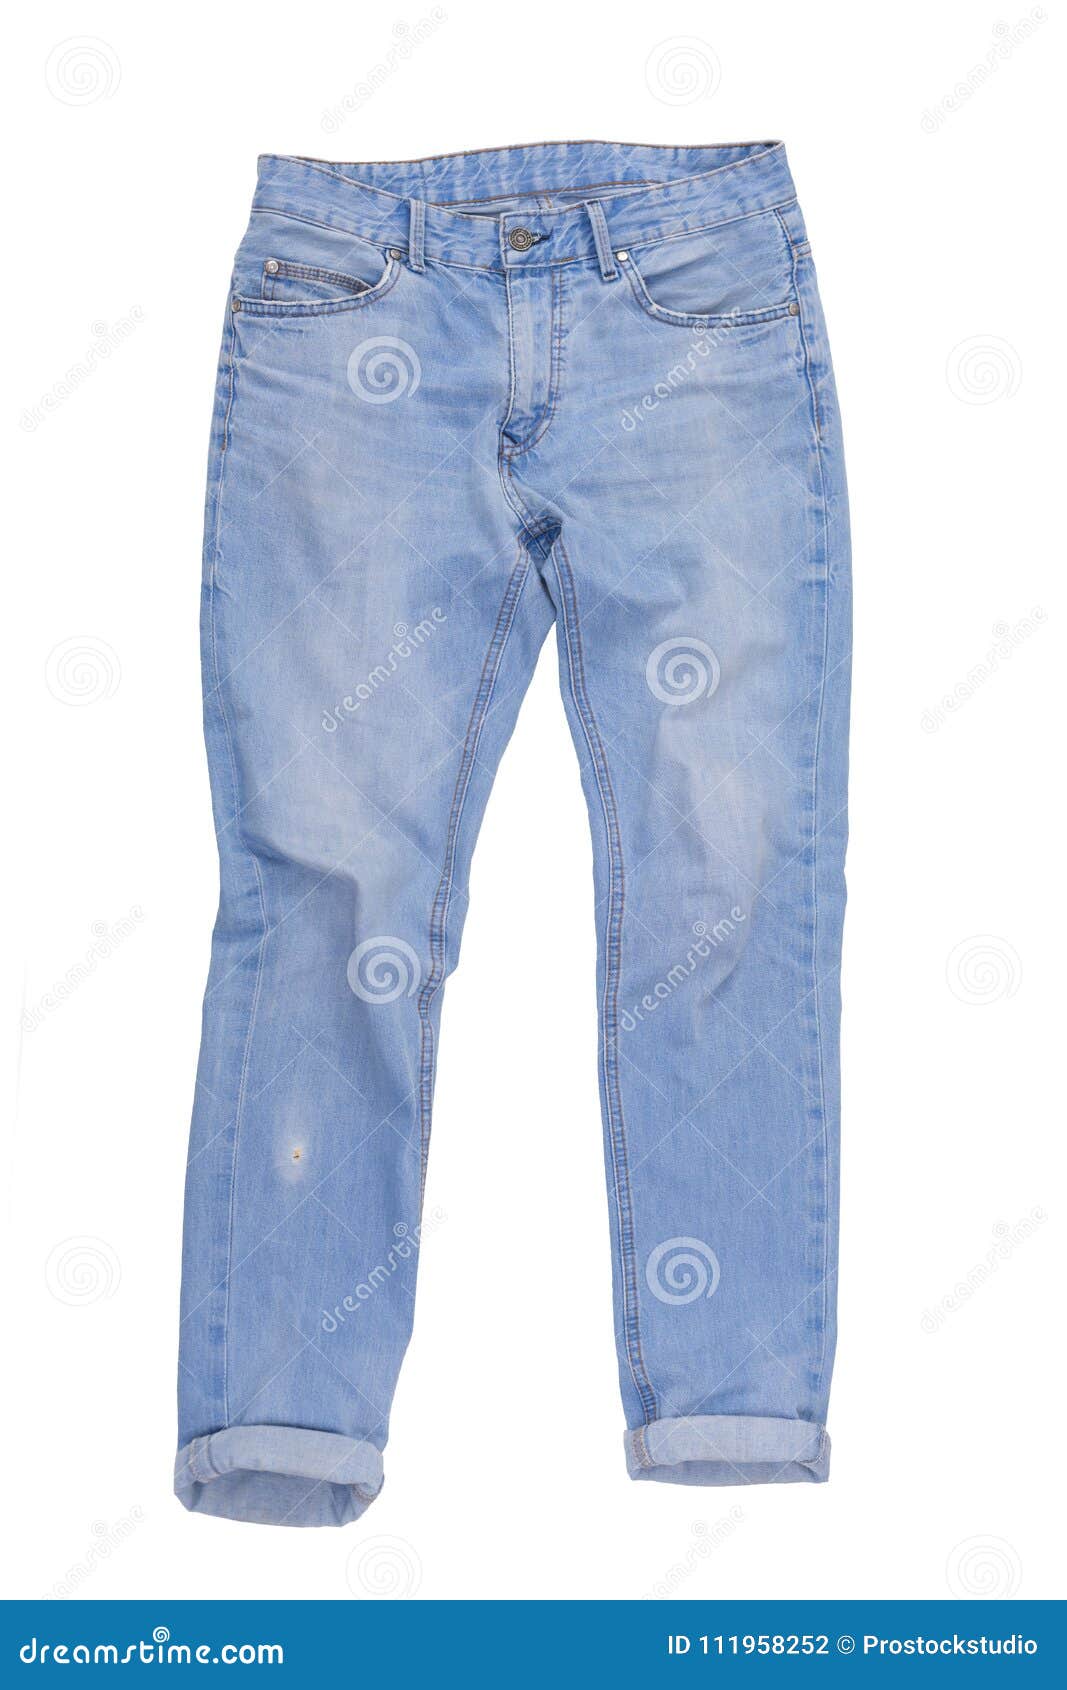 Casual Jeans Pants Isolated on White Background Stock Photo - Image of ...